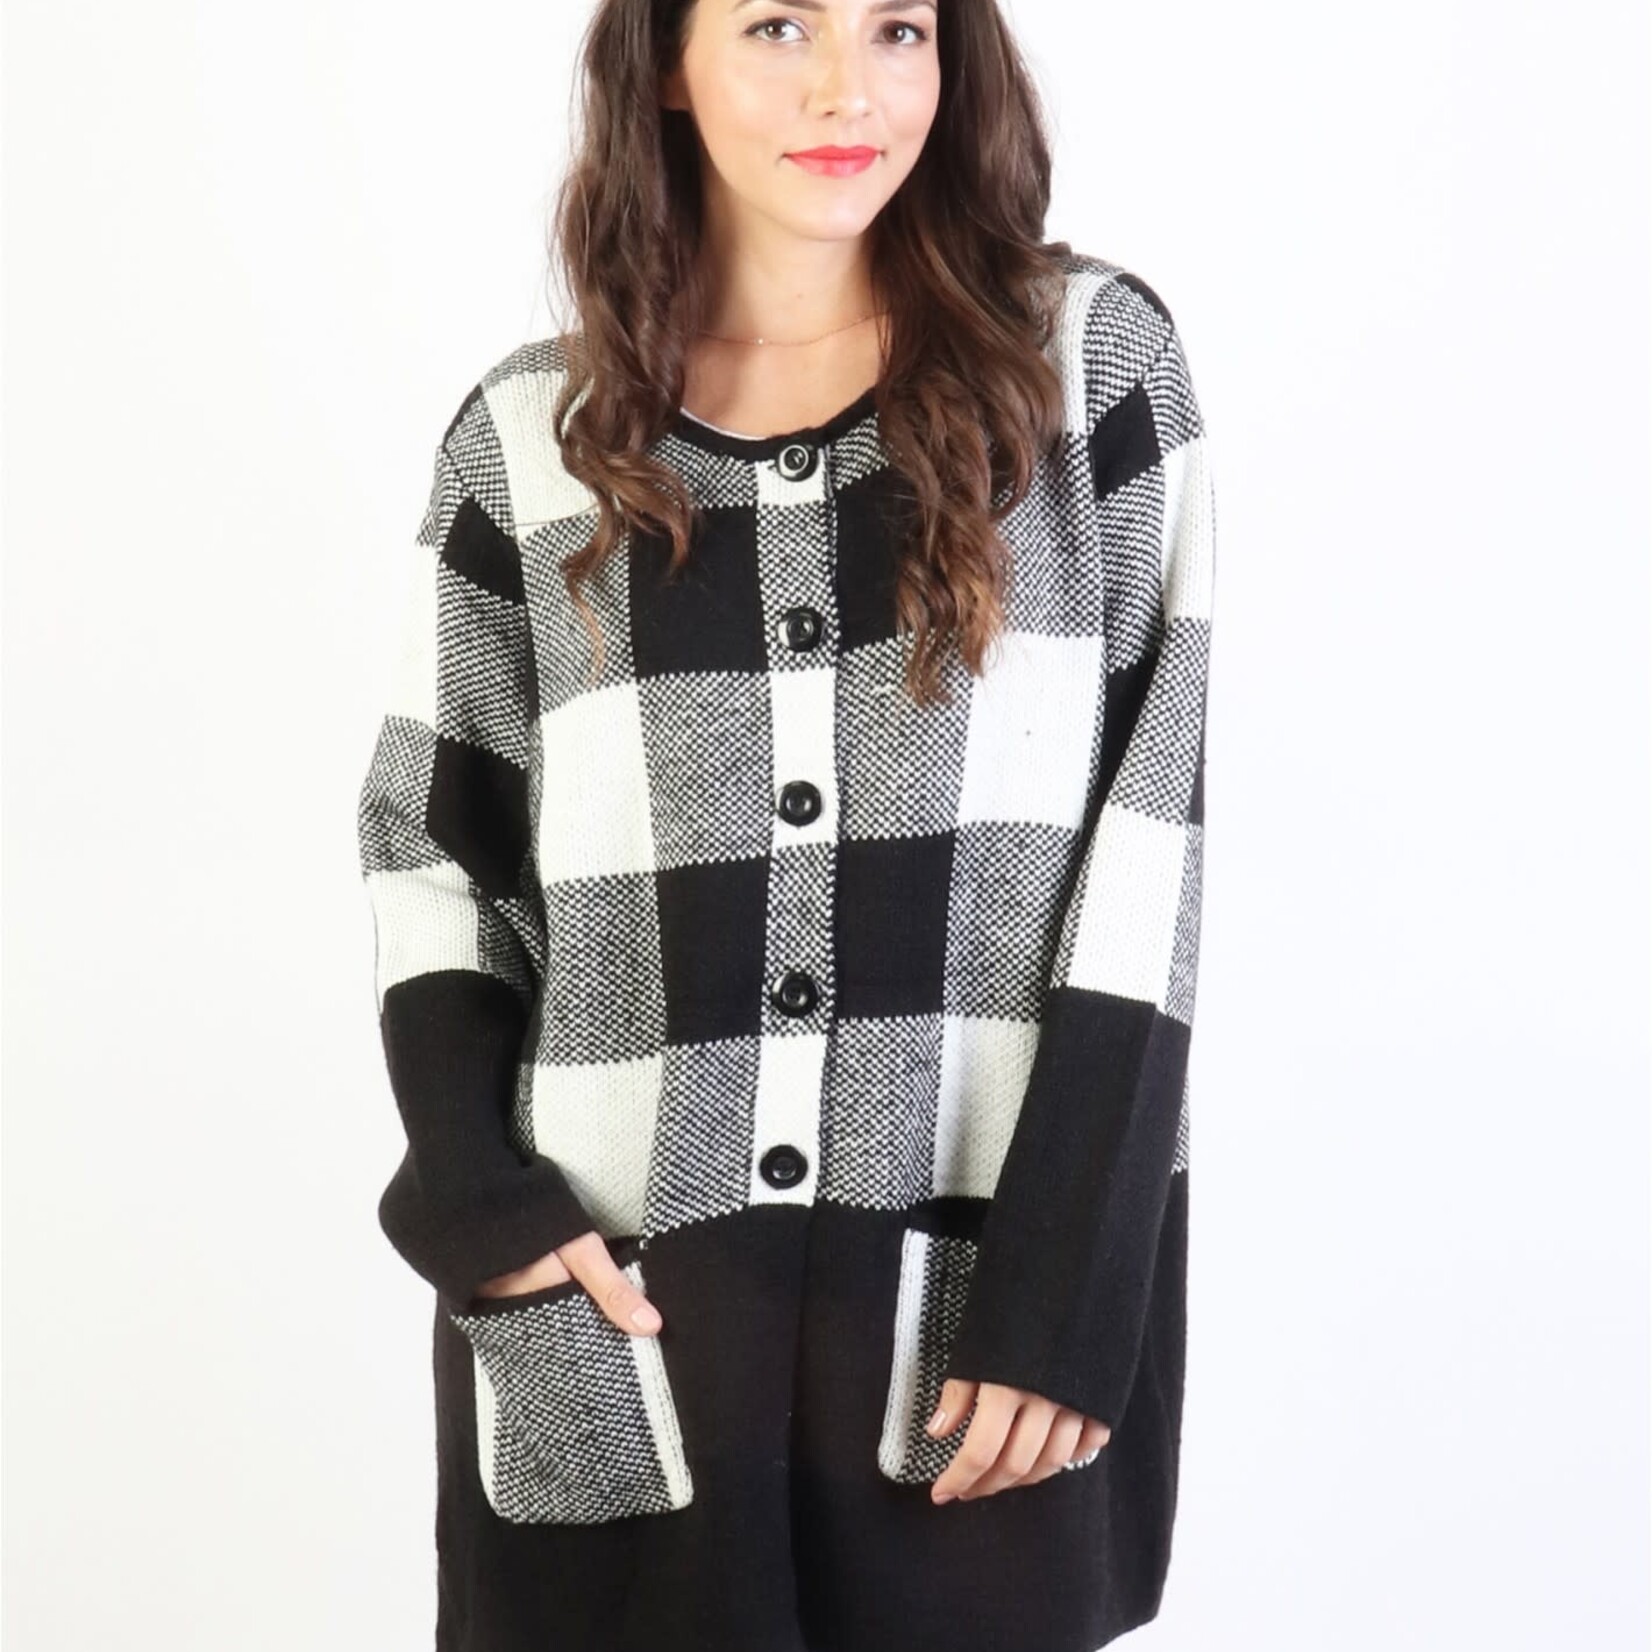 Sweater Plaid Knit   Jacket W/ Buttons and Pockets Blk/Wht